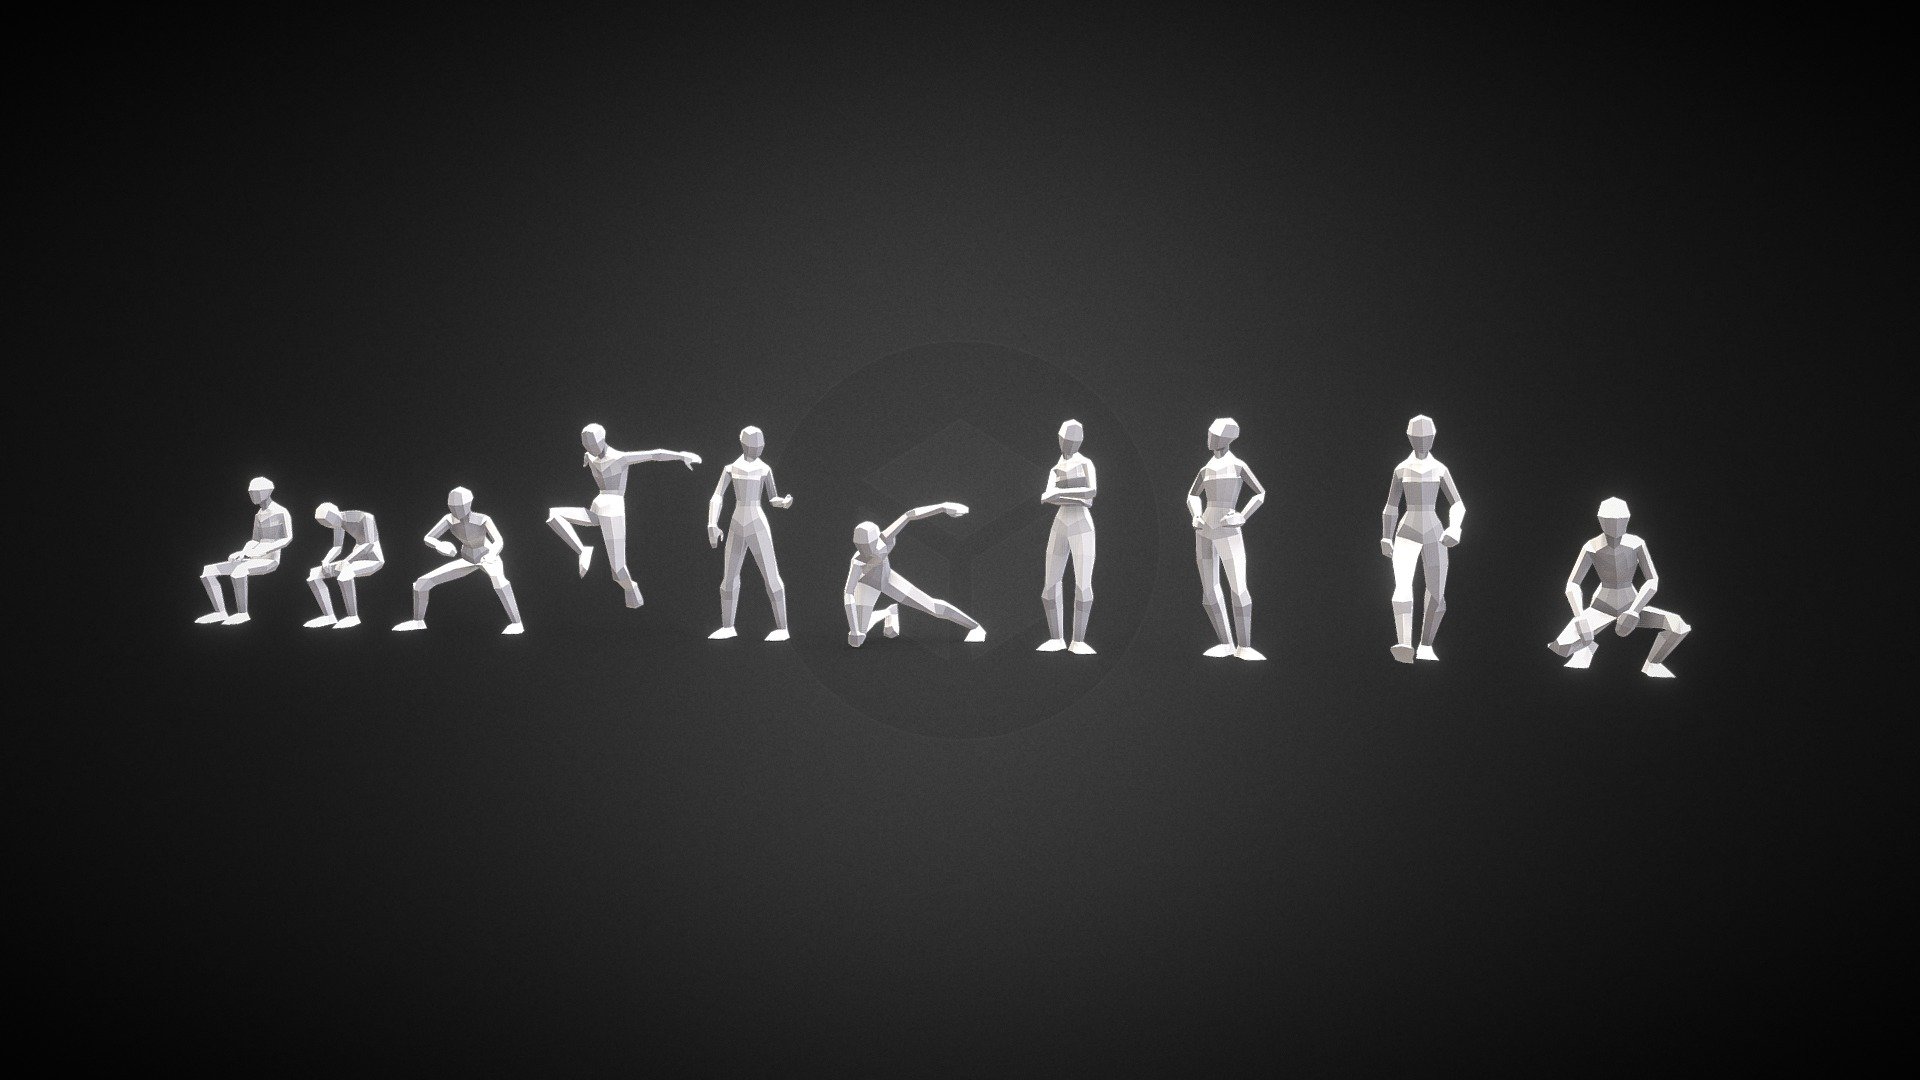 Low poly charcter posed in various positions, free to use for anyone who wants to. Could be used for drawing reference or whatever other use you can find for them. I made these to practice rigging and posing 3d model